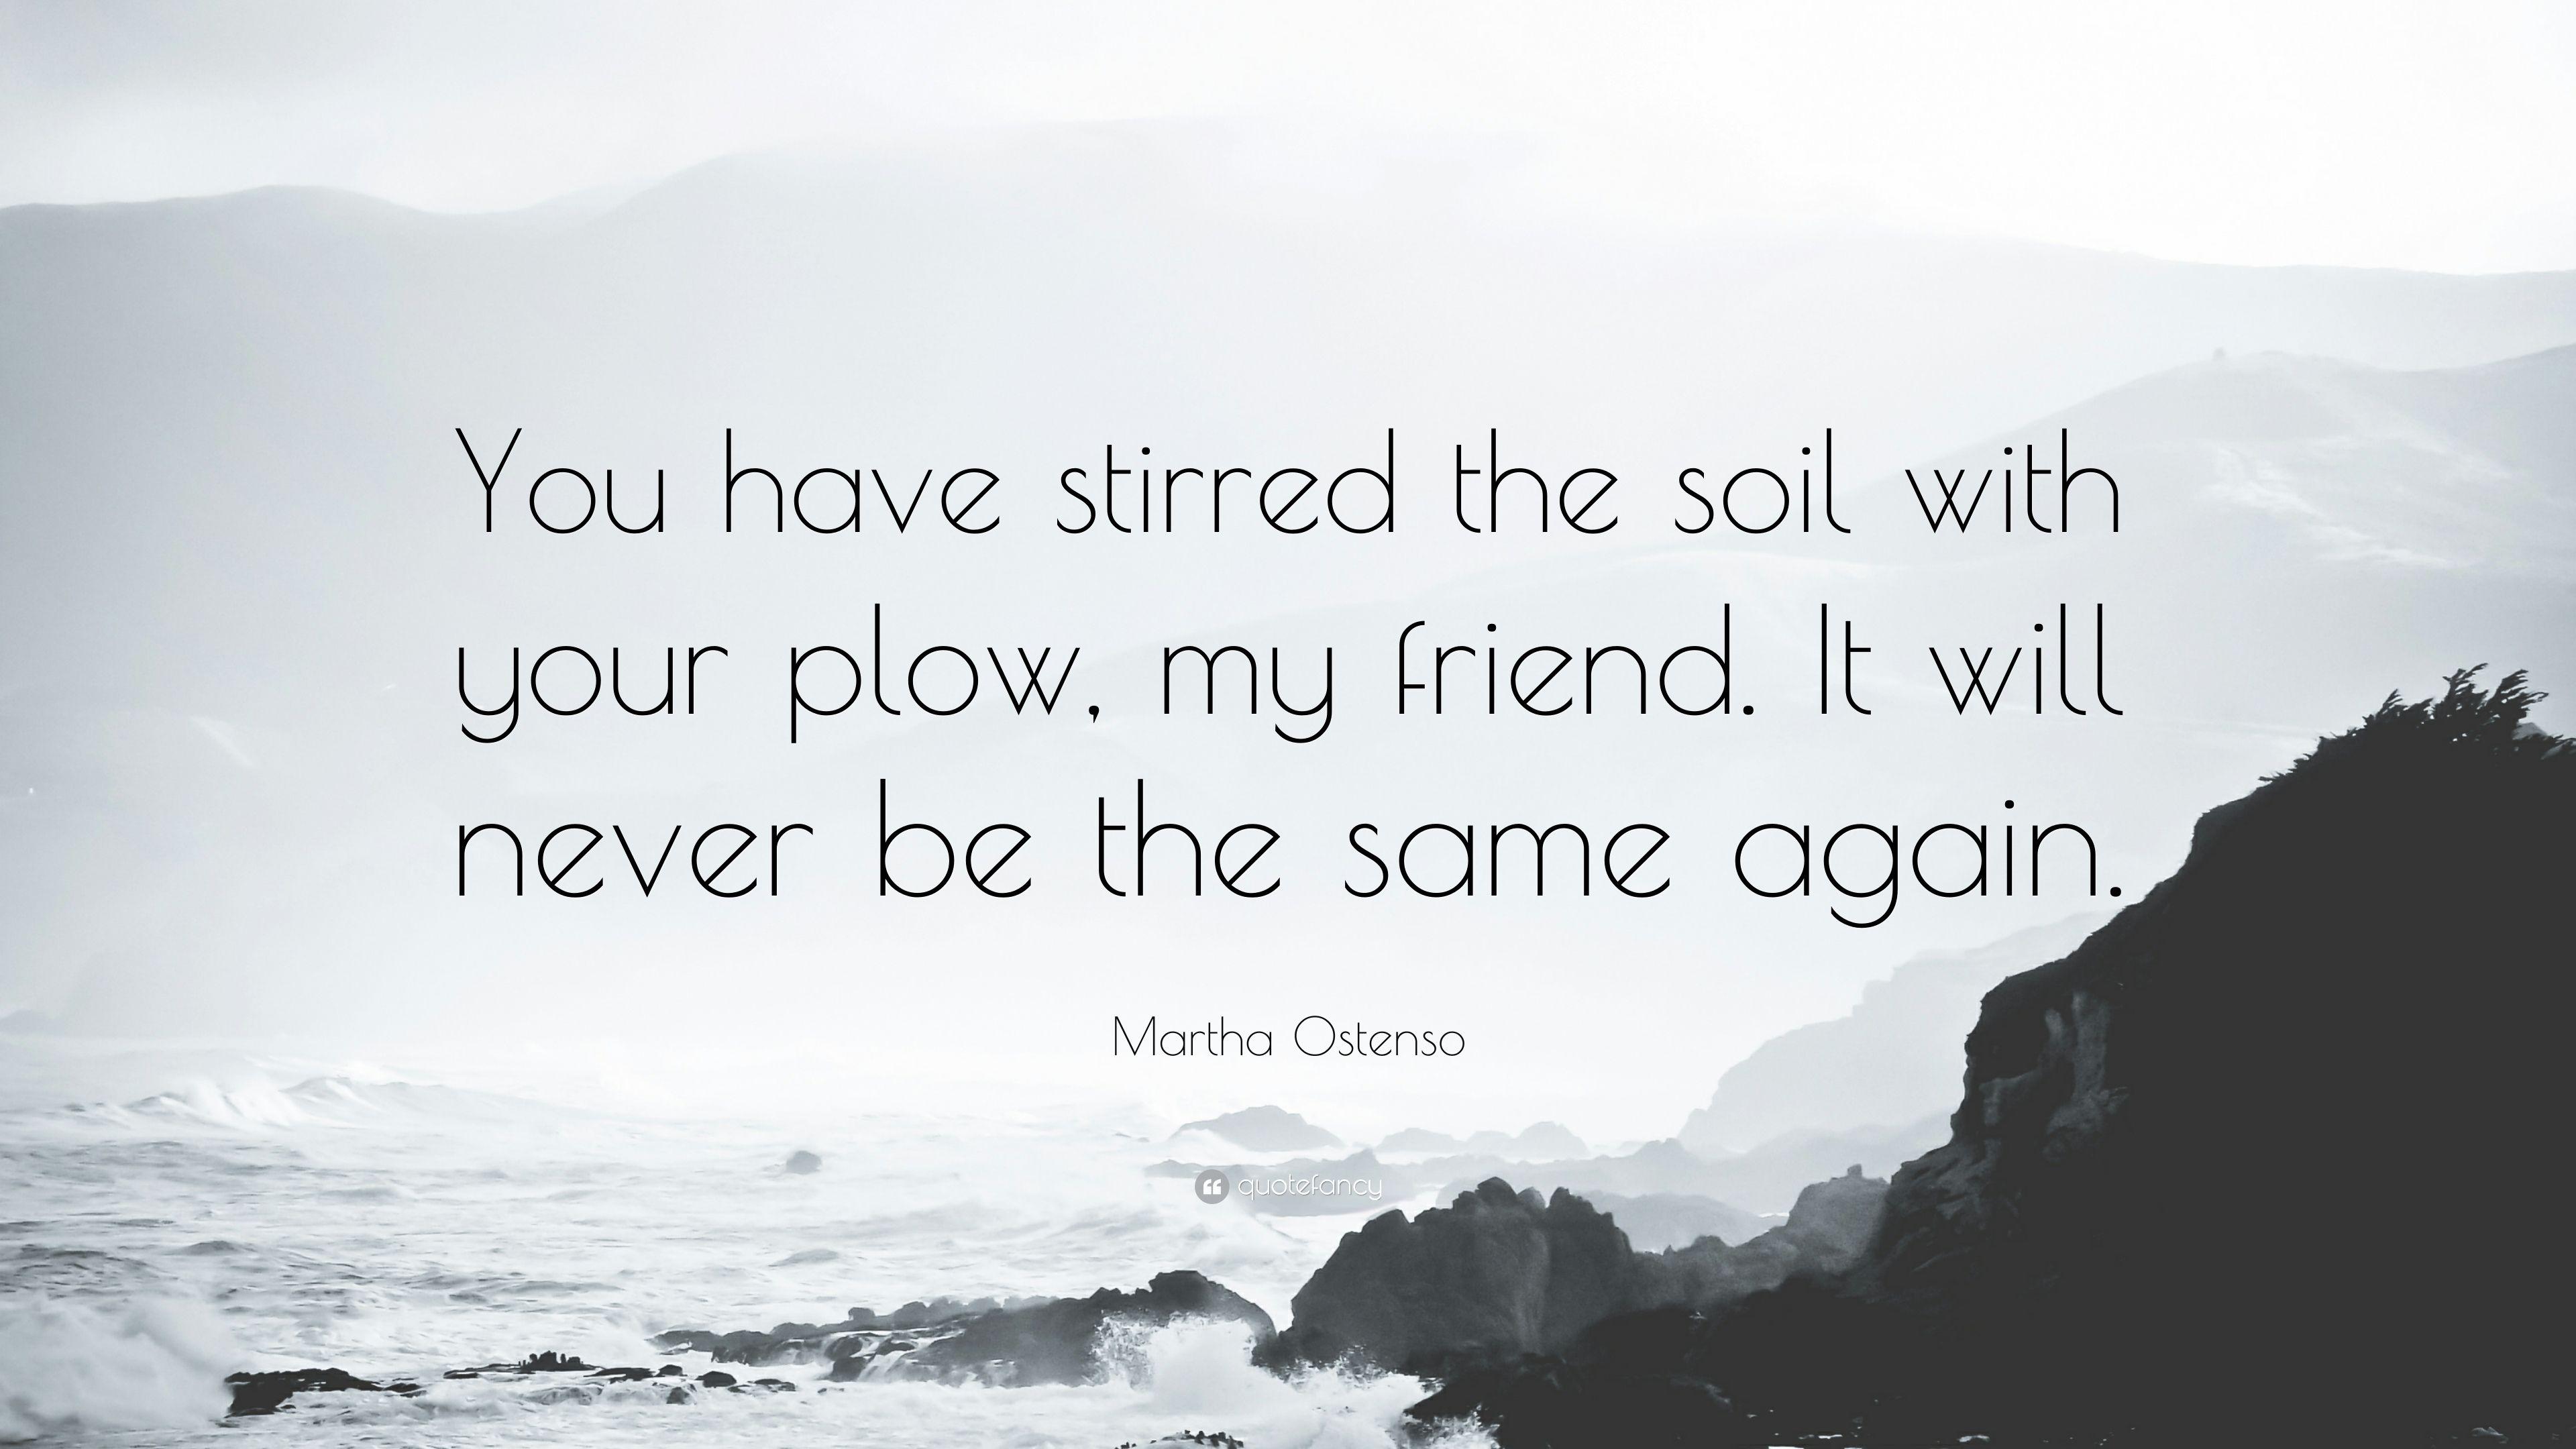 Martha Ostenso Quote: “You have stirred the soil with your plow, my